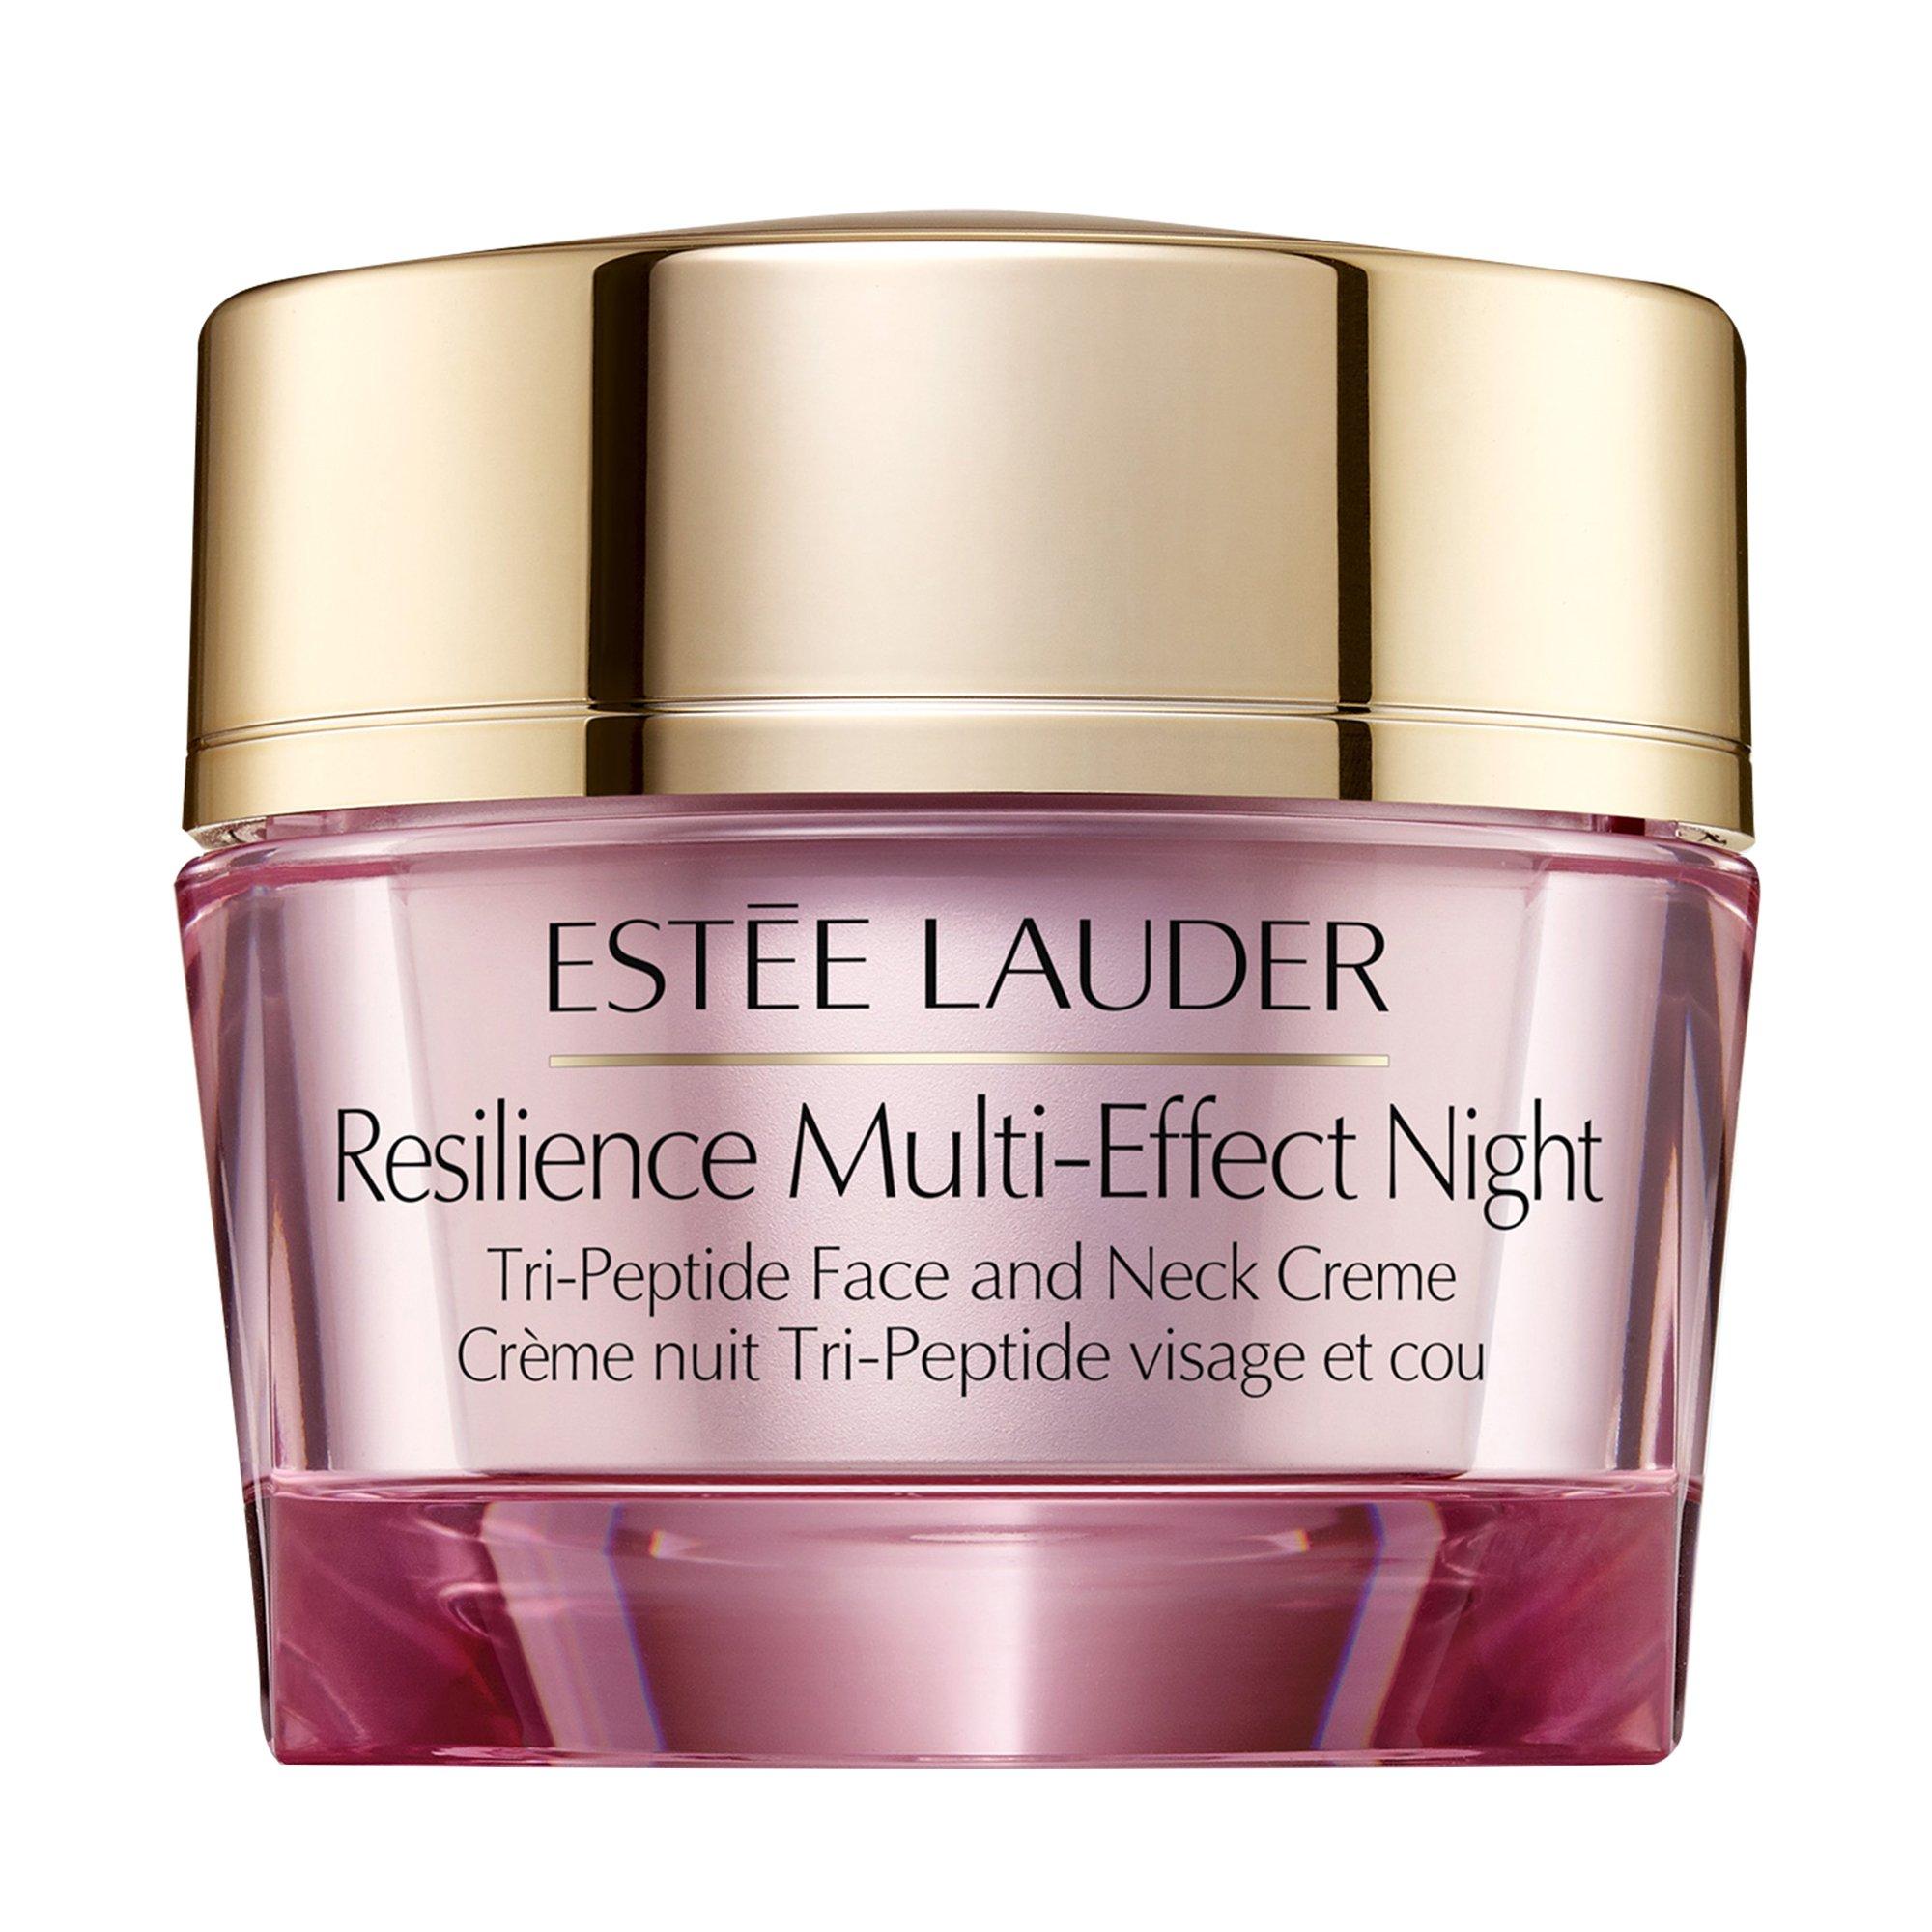 Image of ESTÉE LAUDER Resilience Lift Resilience Multi-Effect Night Tri-Peptide Face and Neck Creme - 50ml